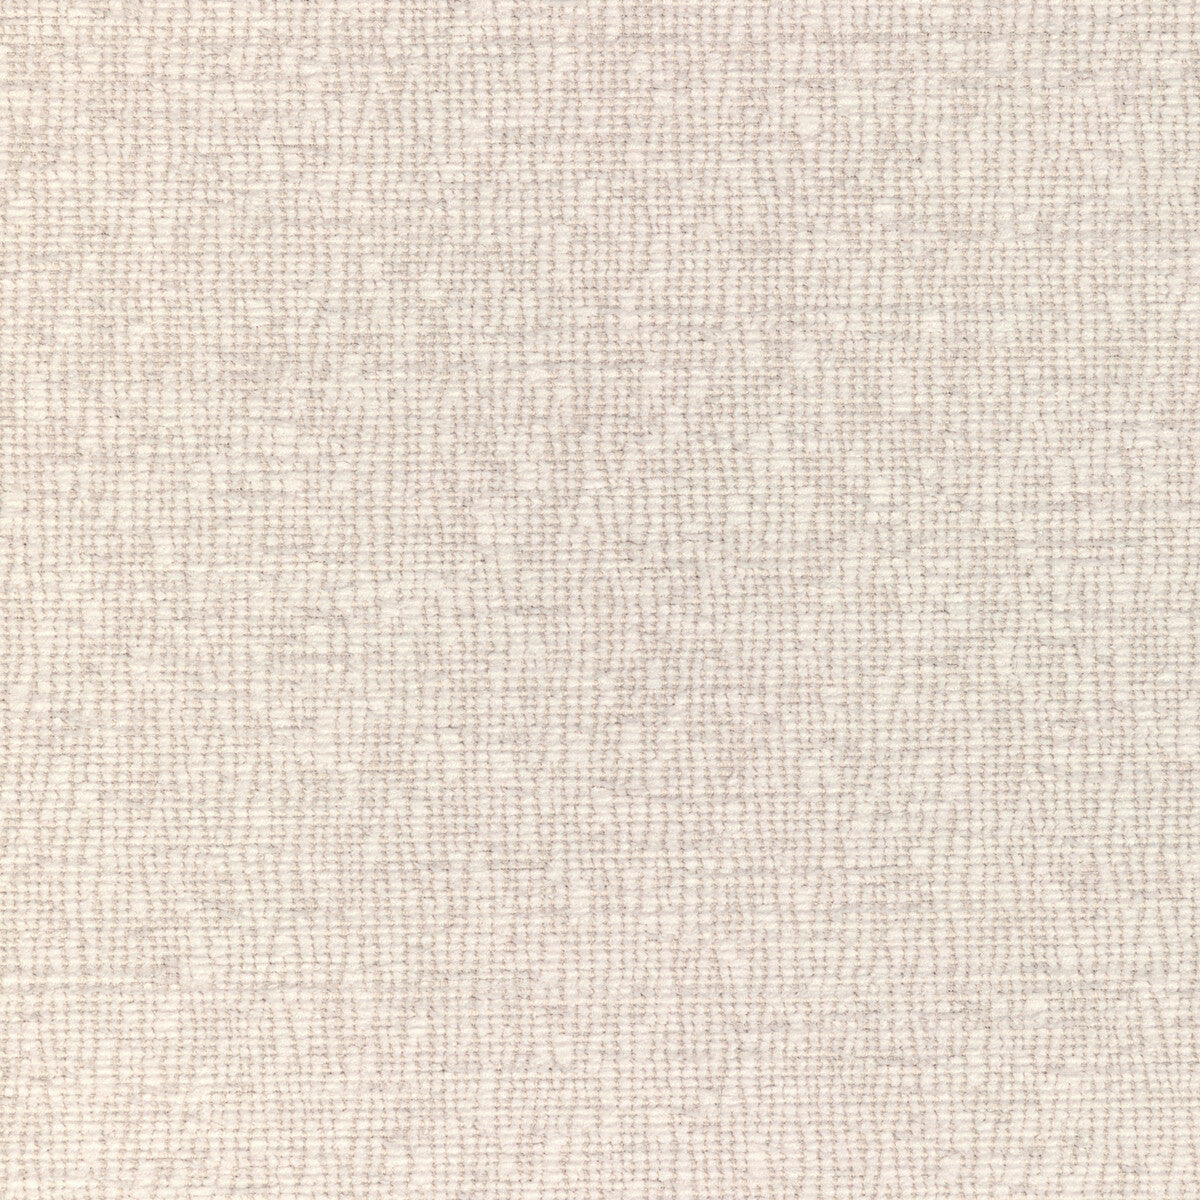 Wash Away fabric in salt color - pattern 36387.1.0 - by Kravet Design in the Crypton Home - Celliant collection